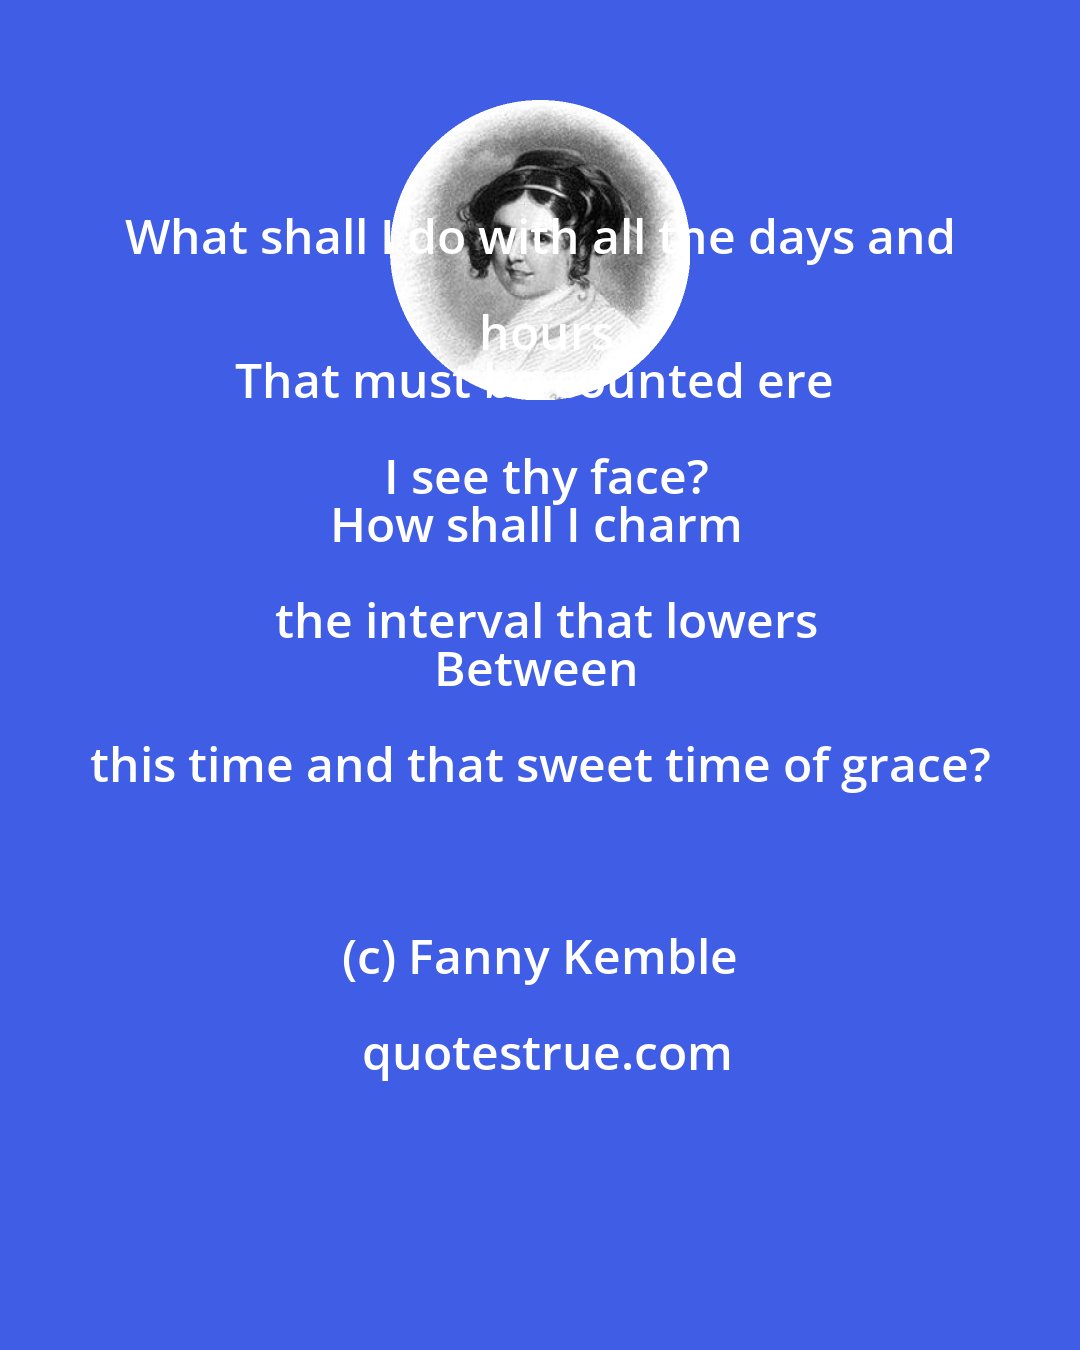 Fanny Kemble: What shall I do with all the days and hours
That must be counted ere I see thy face?
How shall I charm the interval that lowers
Between this time and that sweet time of grace?